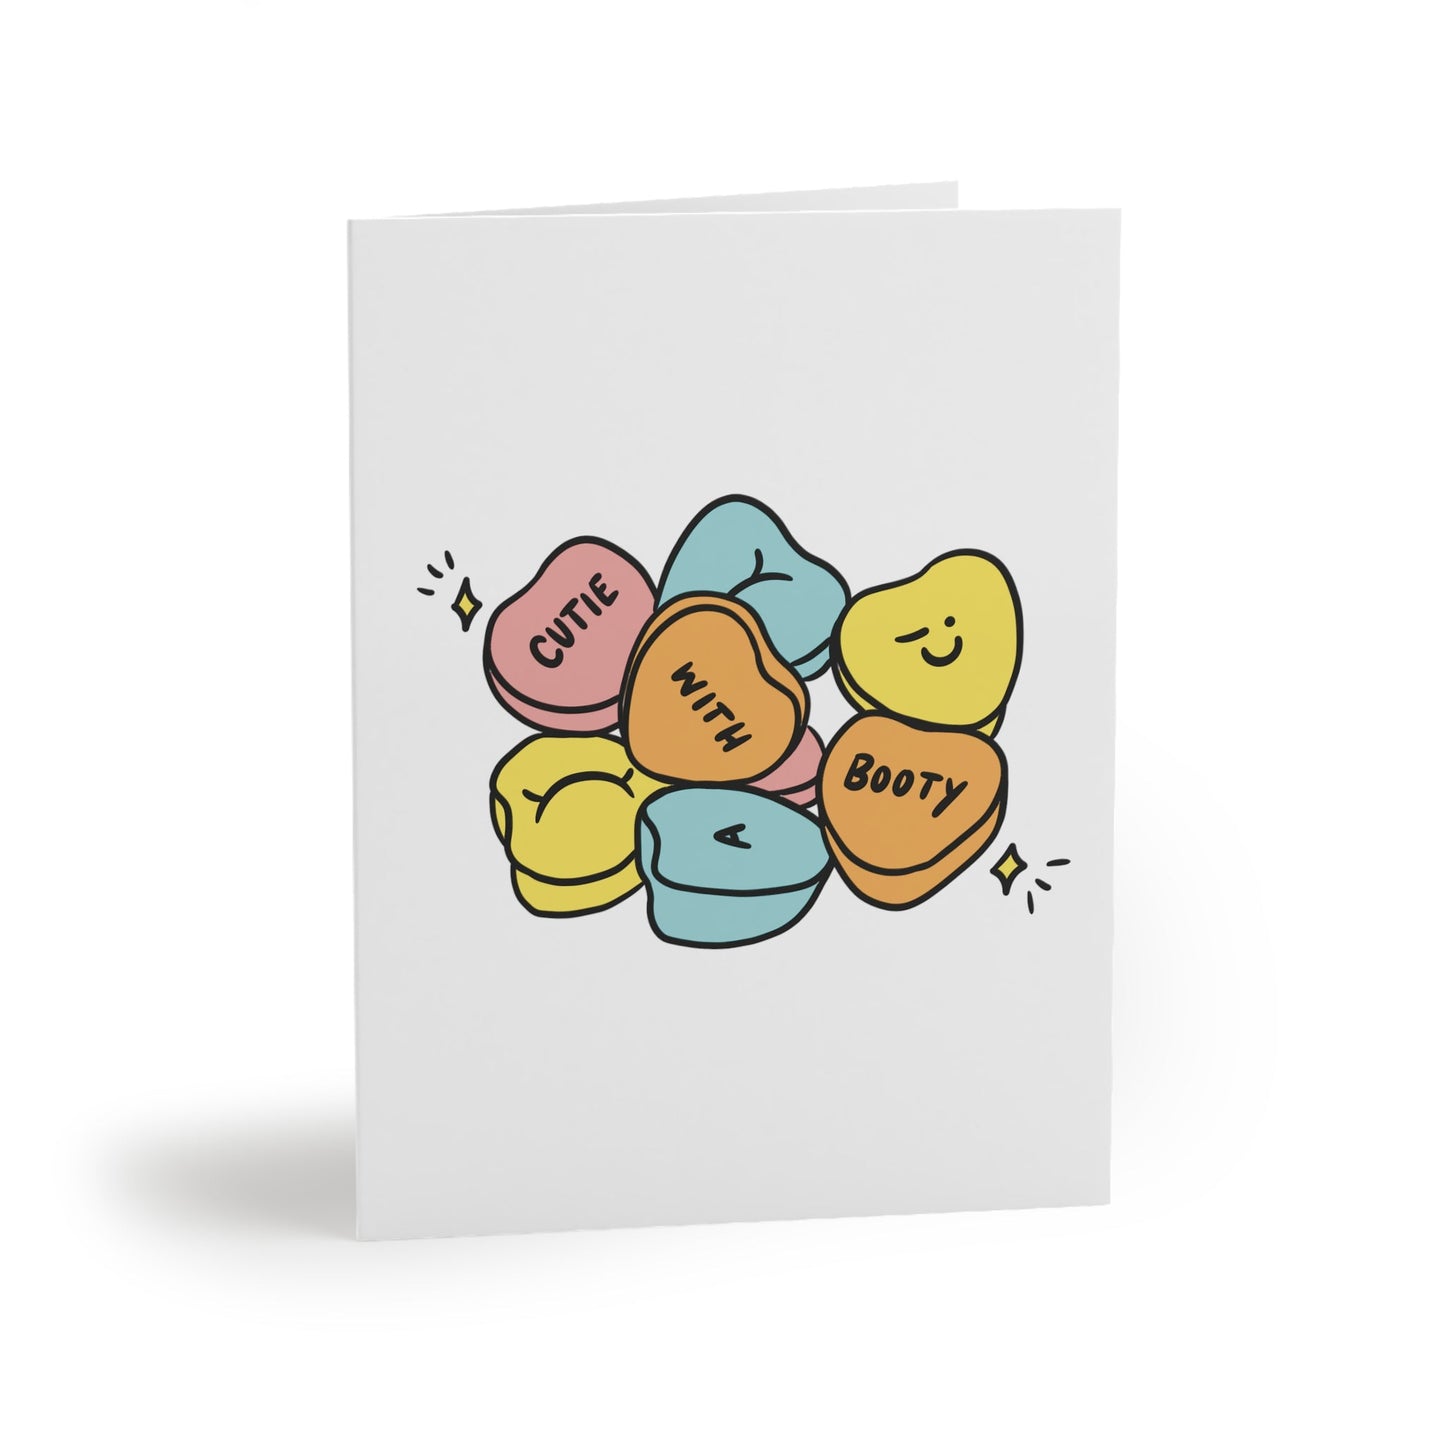 Cheeky Greeting Cards